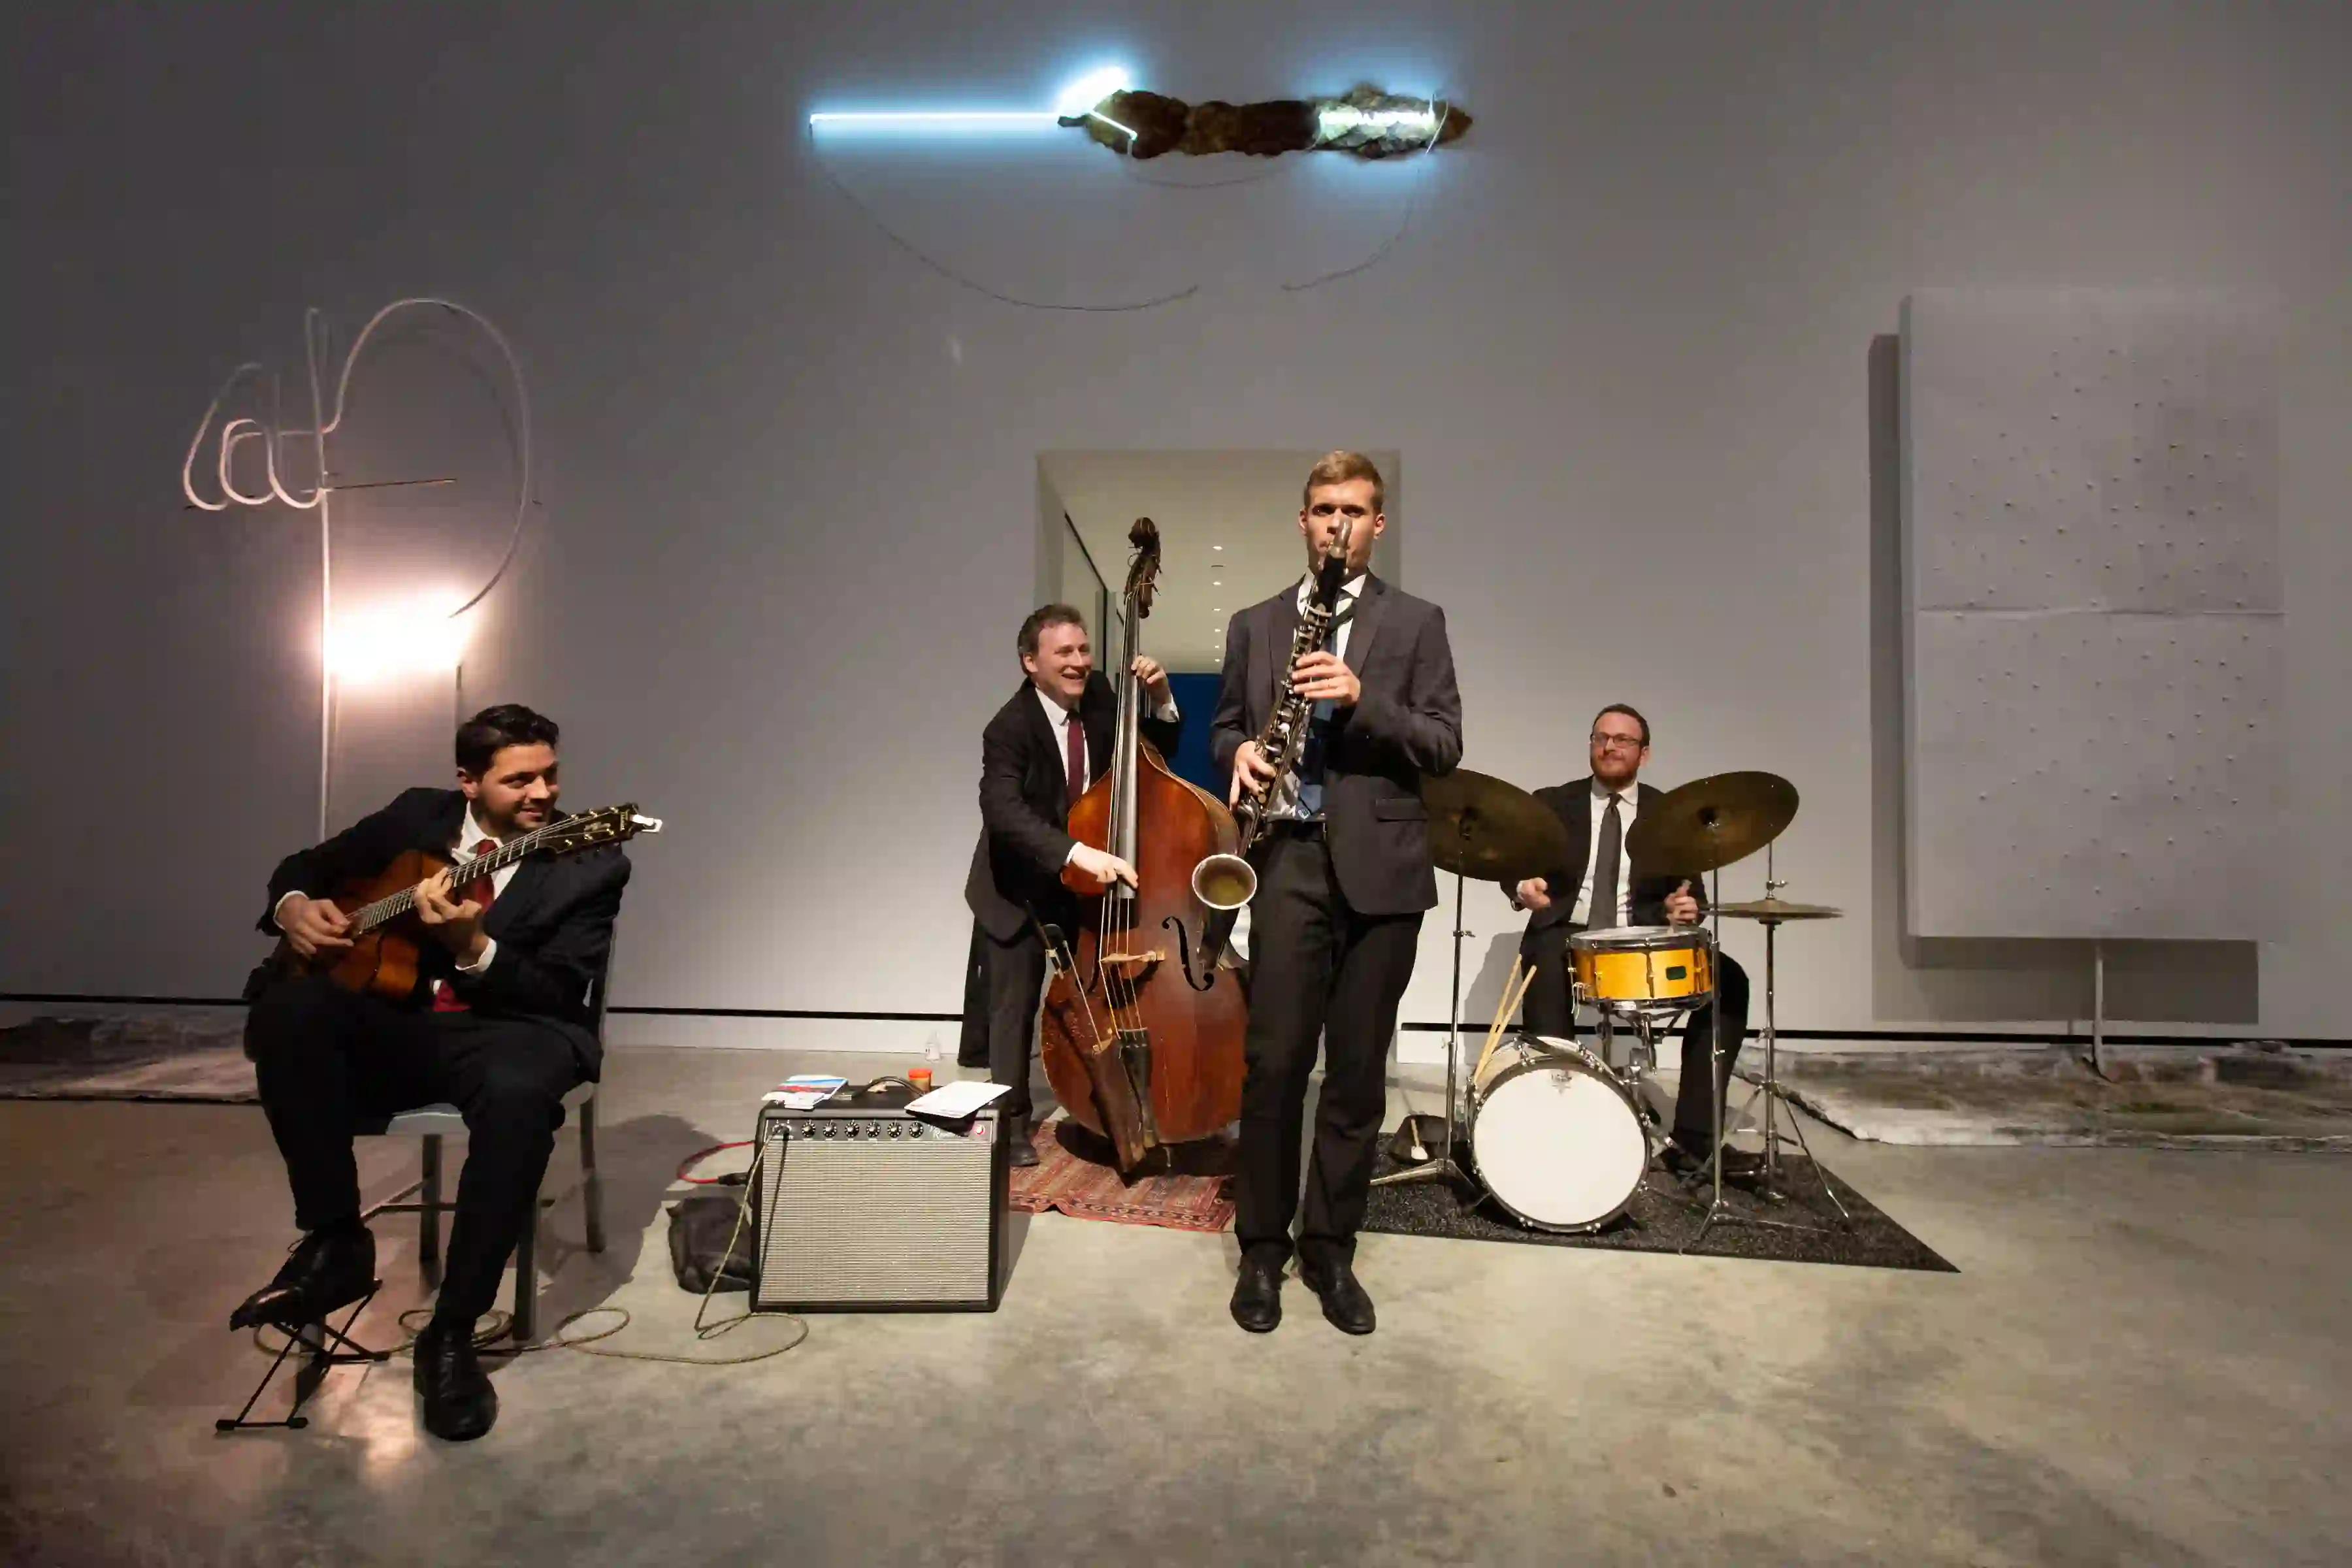 Pasquale Grasso (left) joined by Ari Roland on double bass, Keith Balla on drums, and Stefano Doglioni on bass clarinet